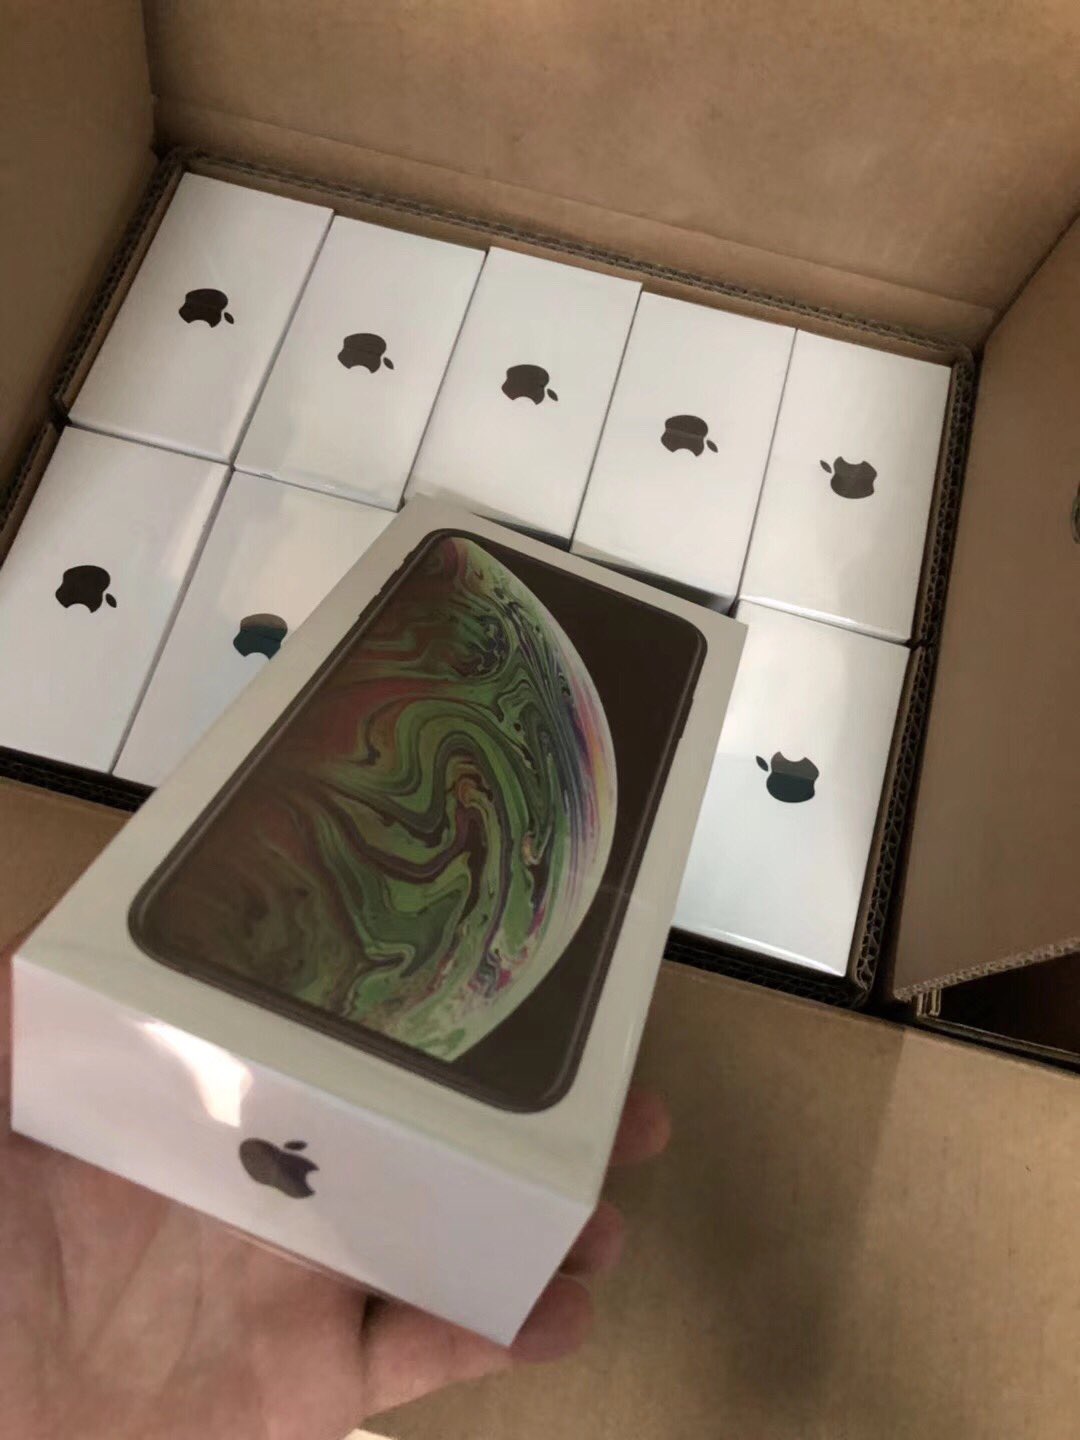 BRAND NEW APPLE IPHONE X, XS, XS MAX, SIM-FREE, FACTORY SEALED, NEVER-OPENED, FACTORY UNLOCKED, 100% ORIGINAL